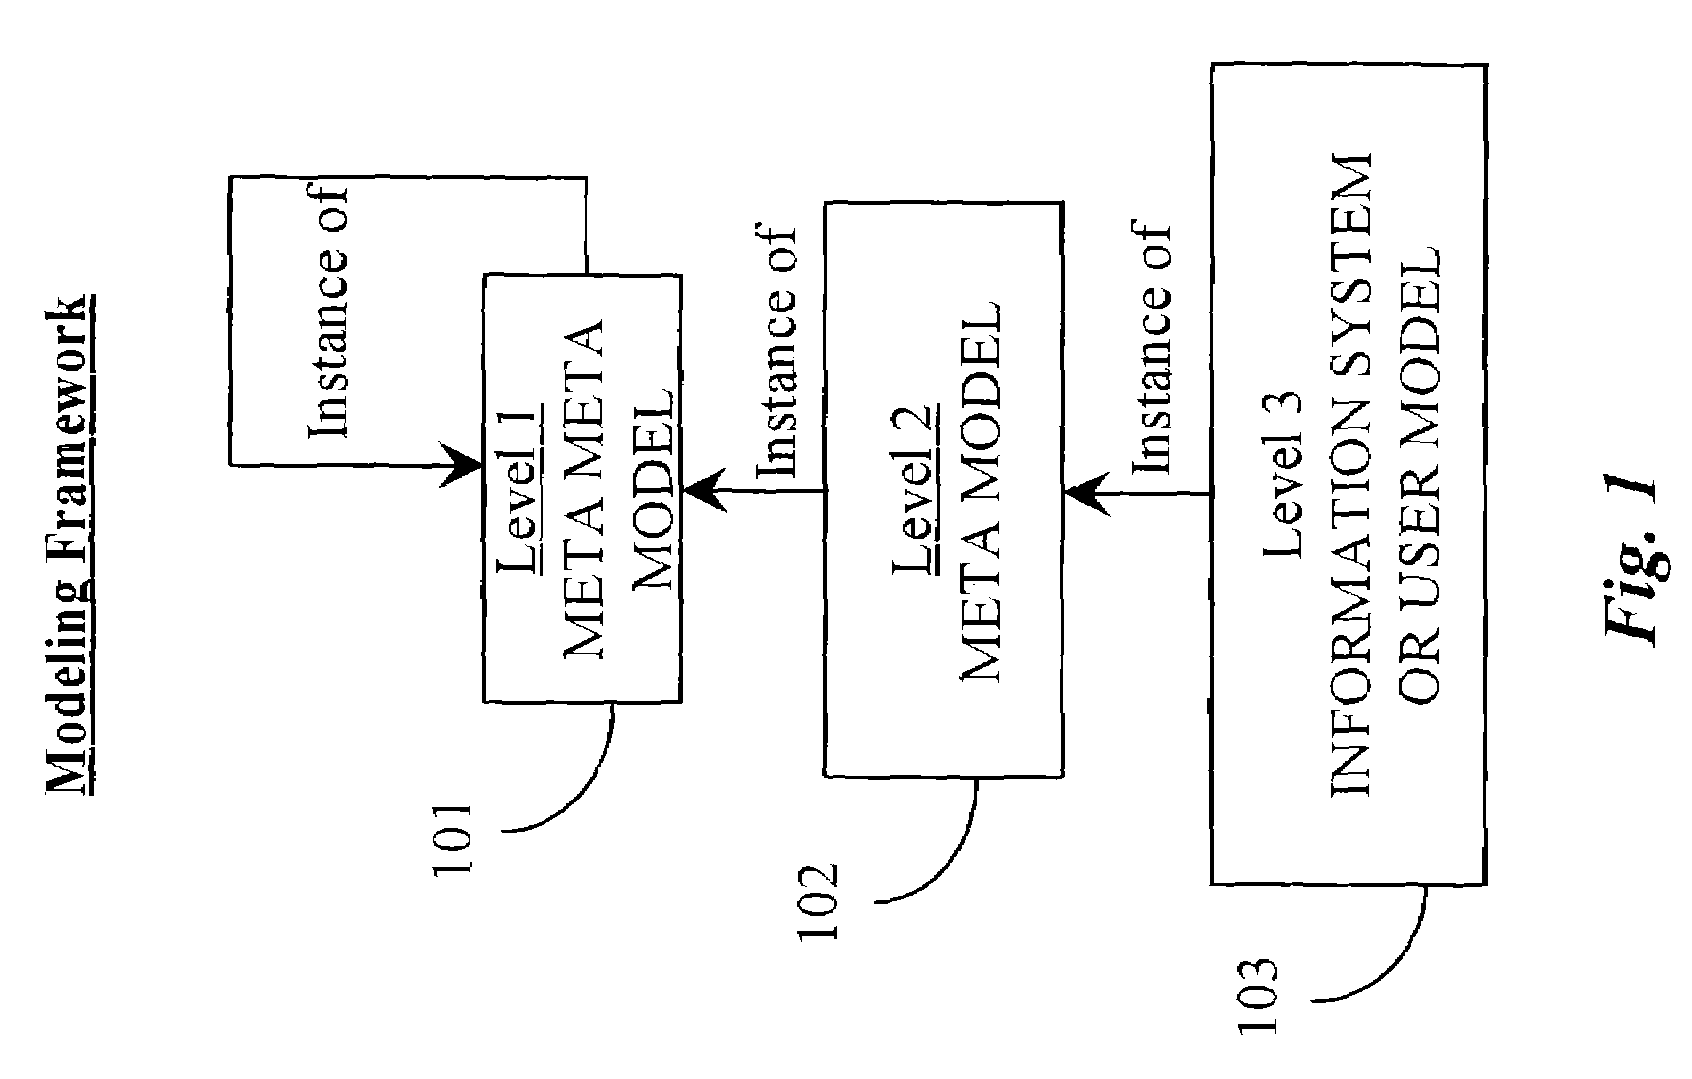 Method and apparatus for versioning and configuration management of object models